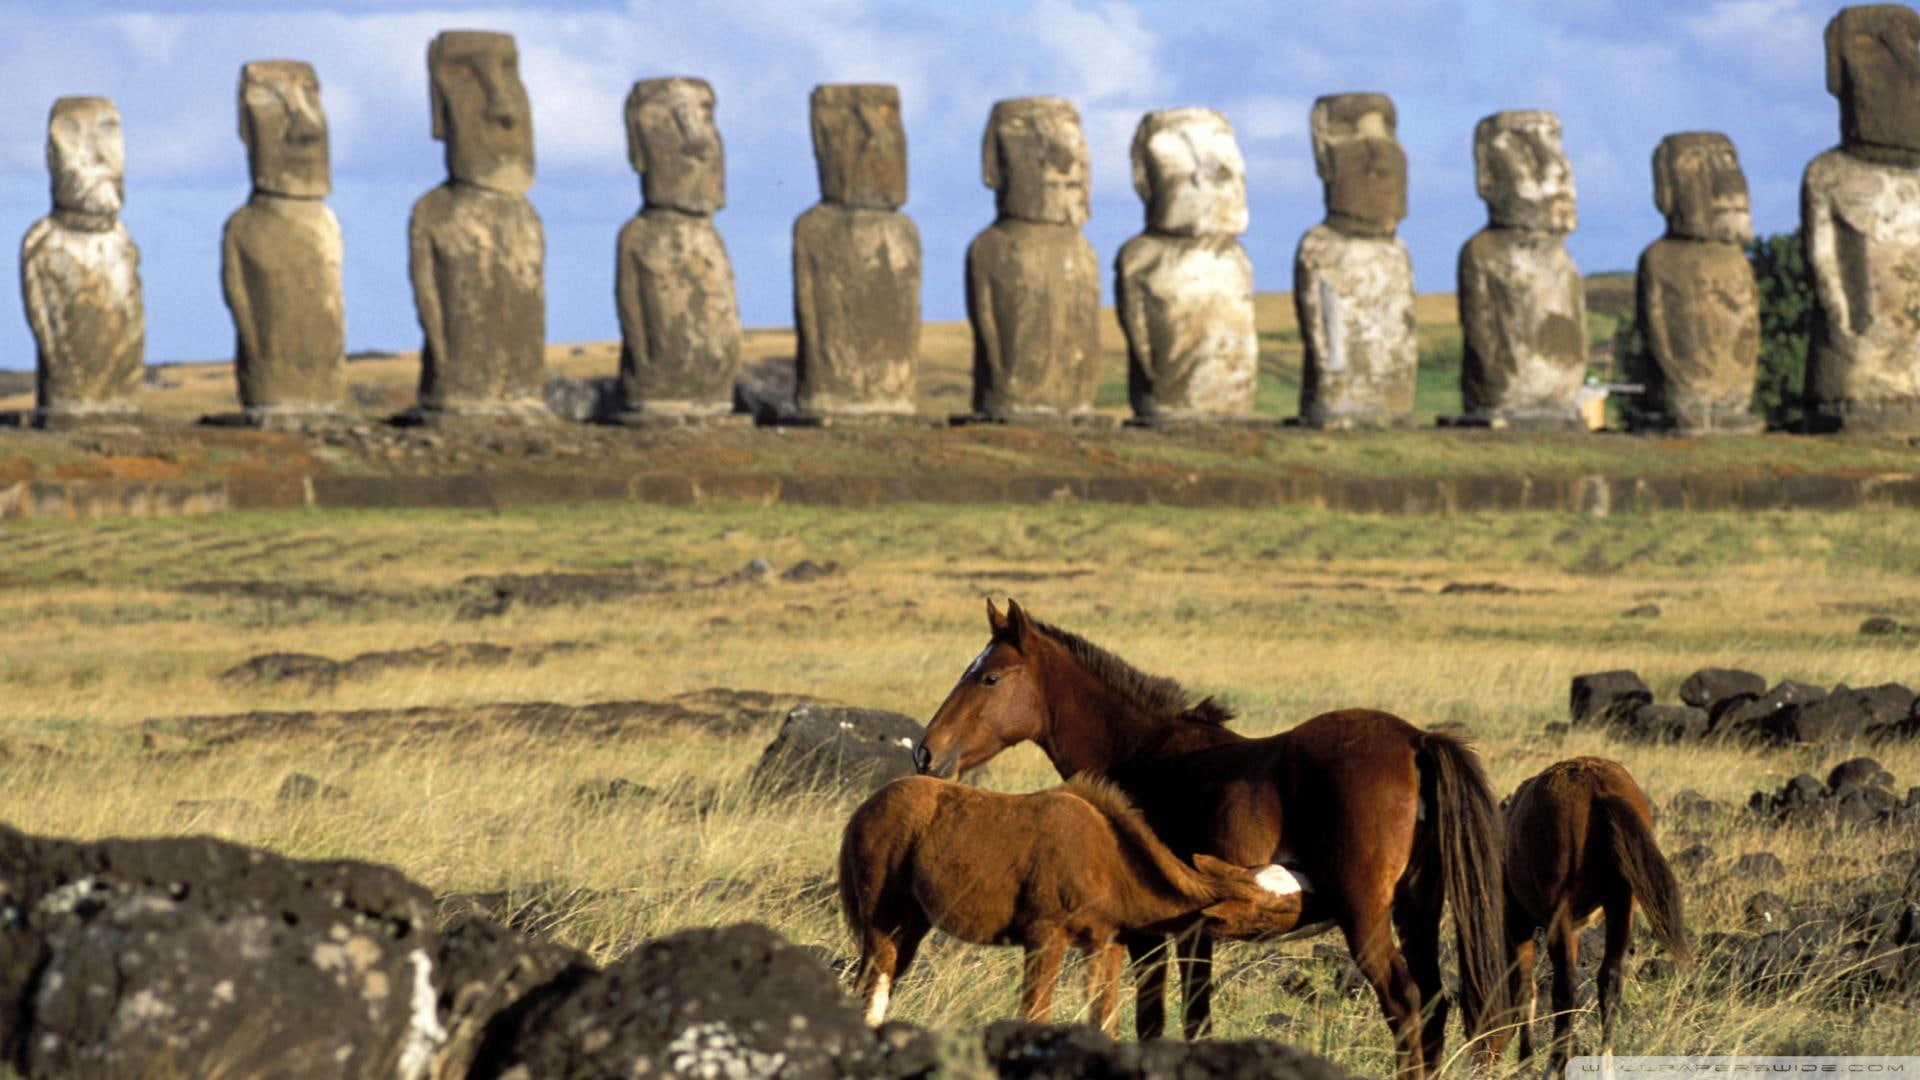 Horses Of Easter Isl Chile, brown horse, stones, grass, statues